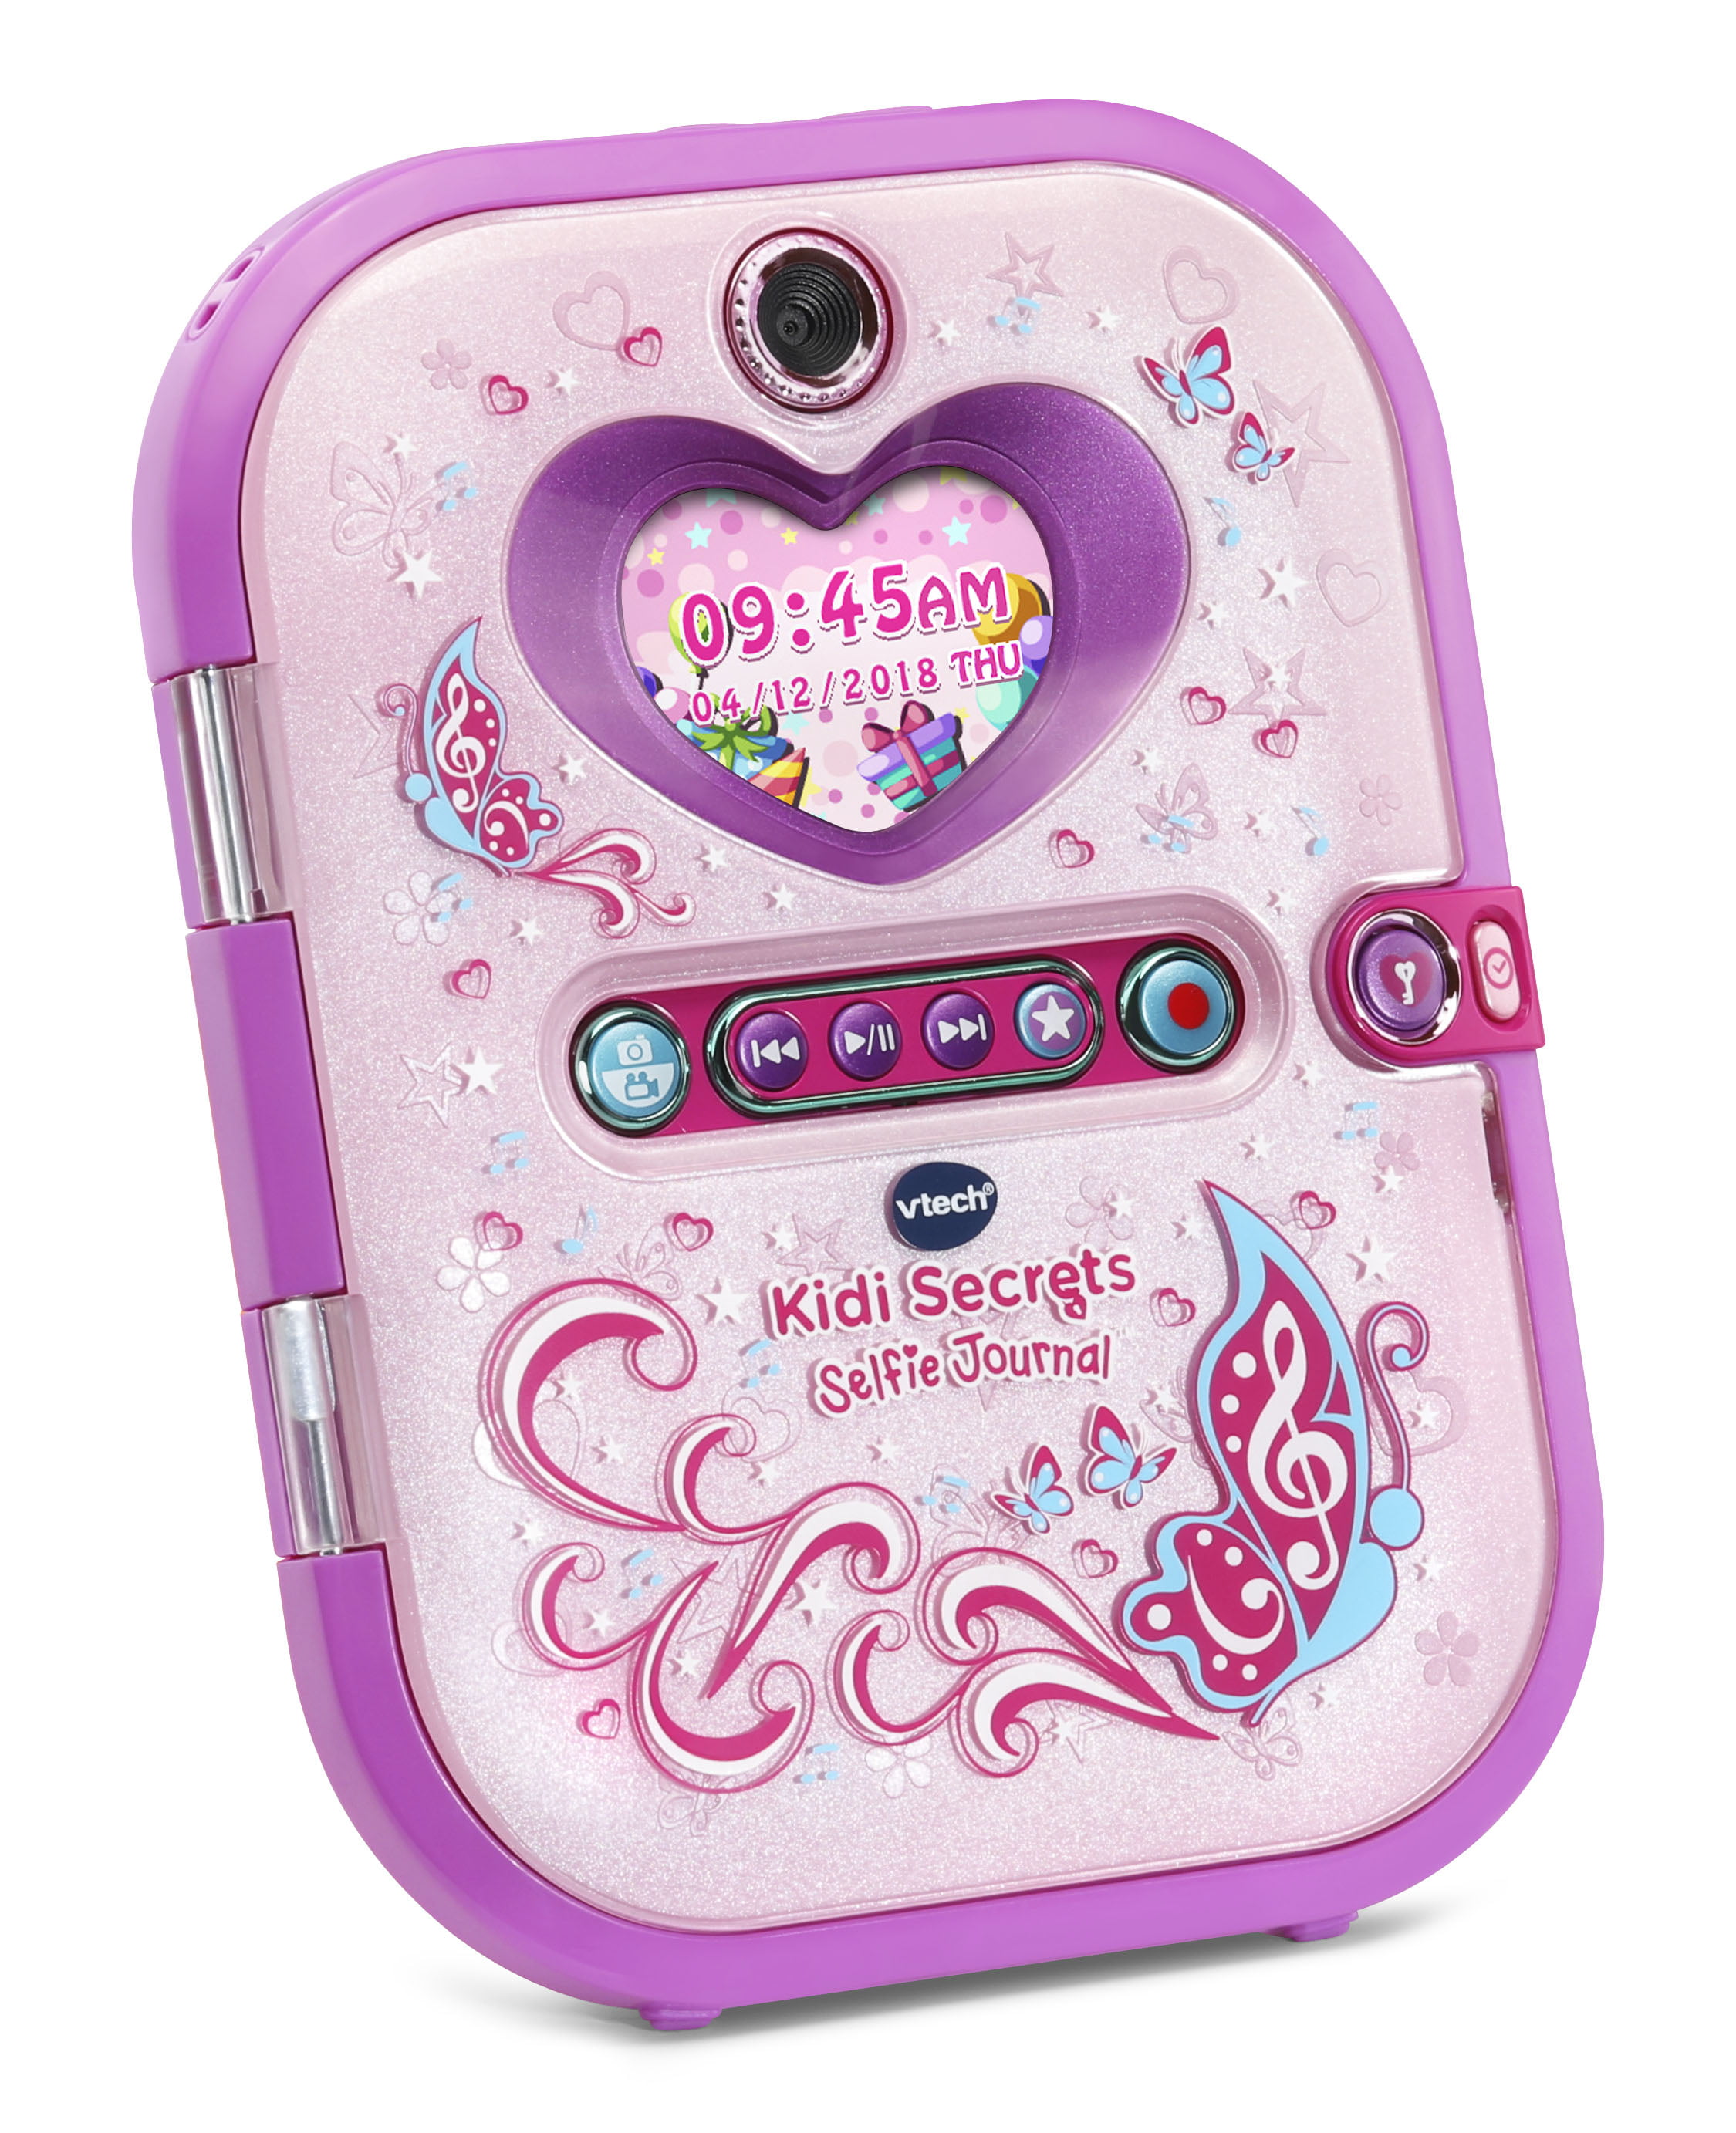 Elephant Steps on Instagram: VTech Kidi Secrets Selfie Journal with Face  Identifier FRENCH Thanks to the voice memo, you can save messages in the  diary and add photos. With a colored screen